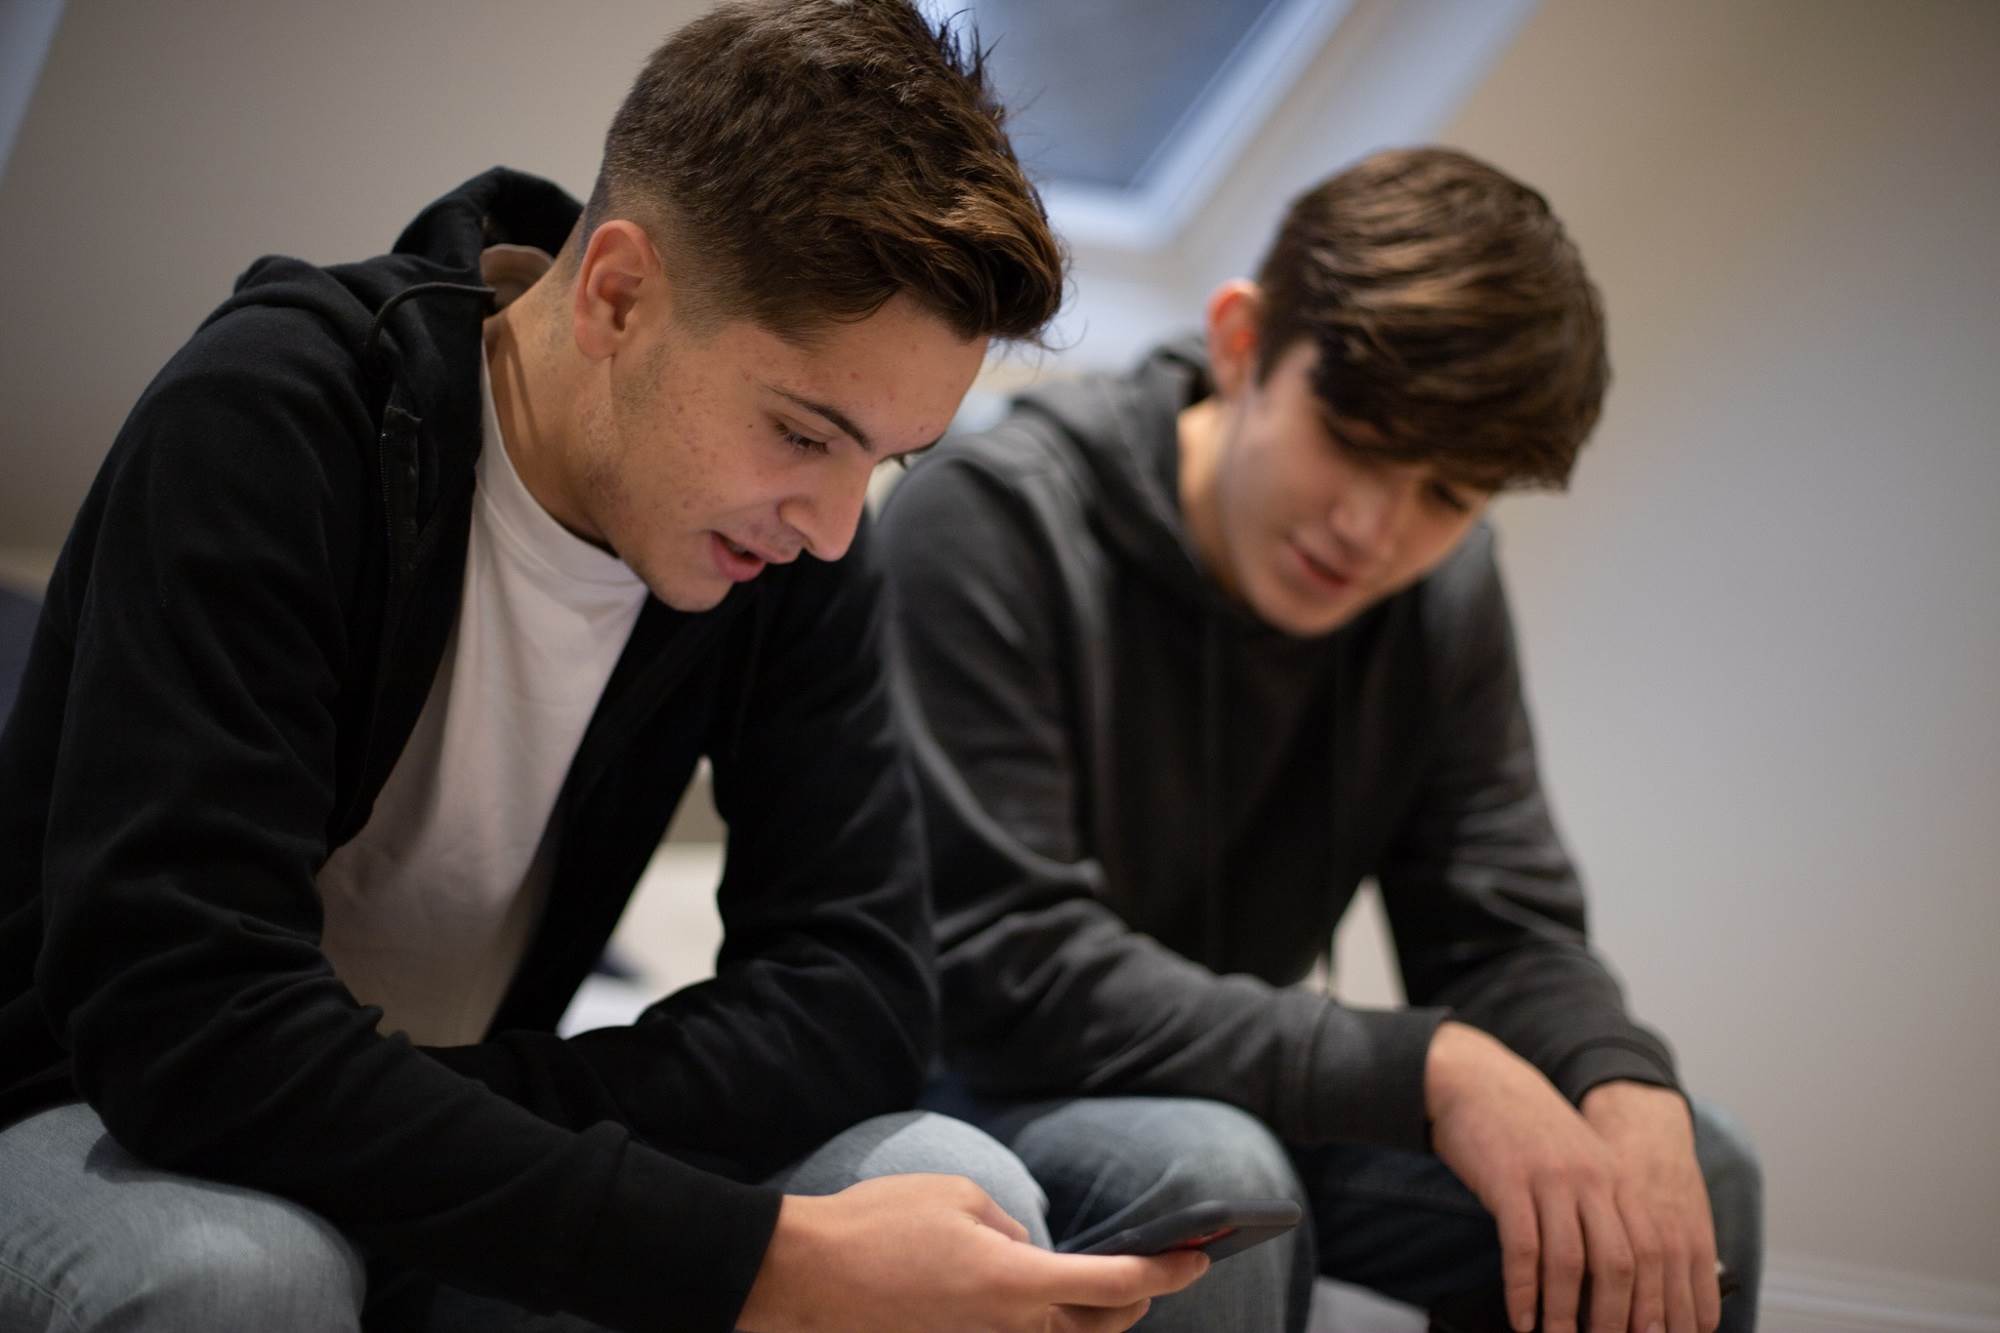 Teen Boys Discussing Mobile Content Sat Down